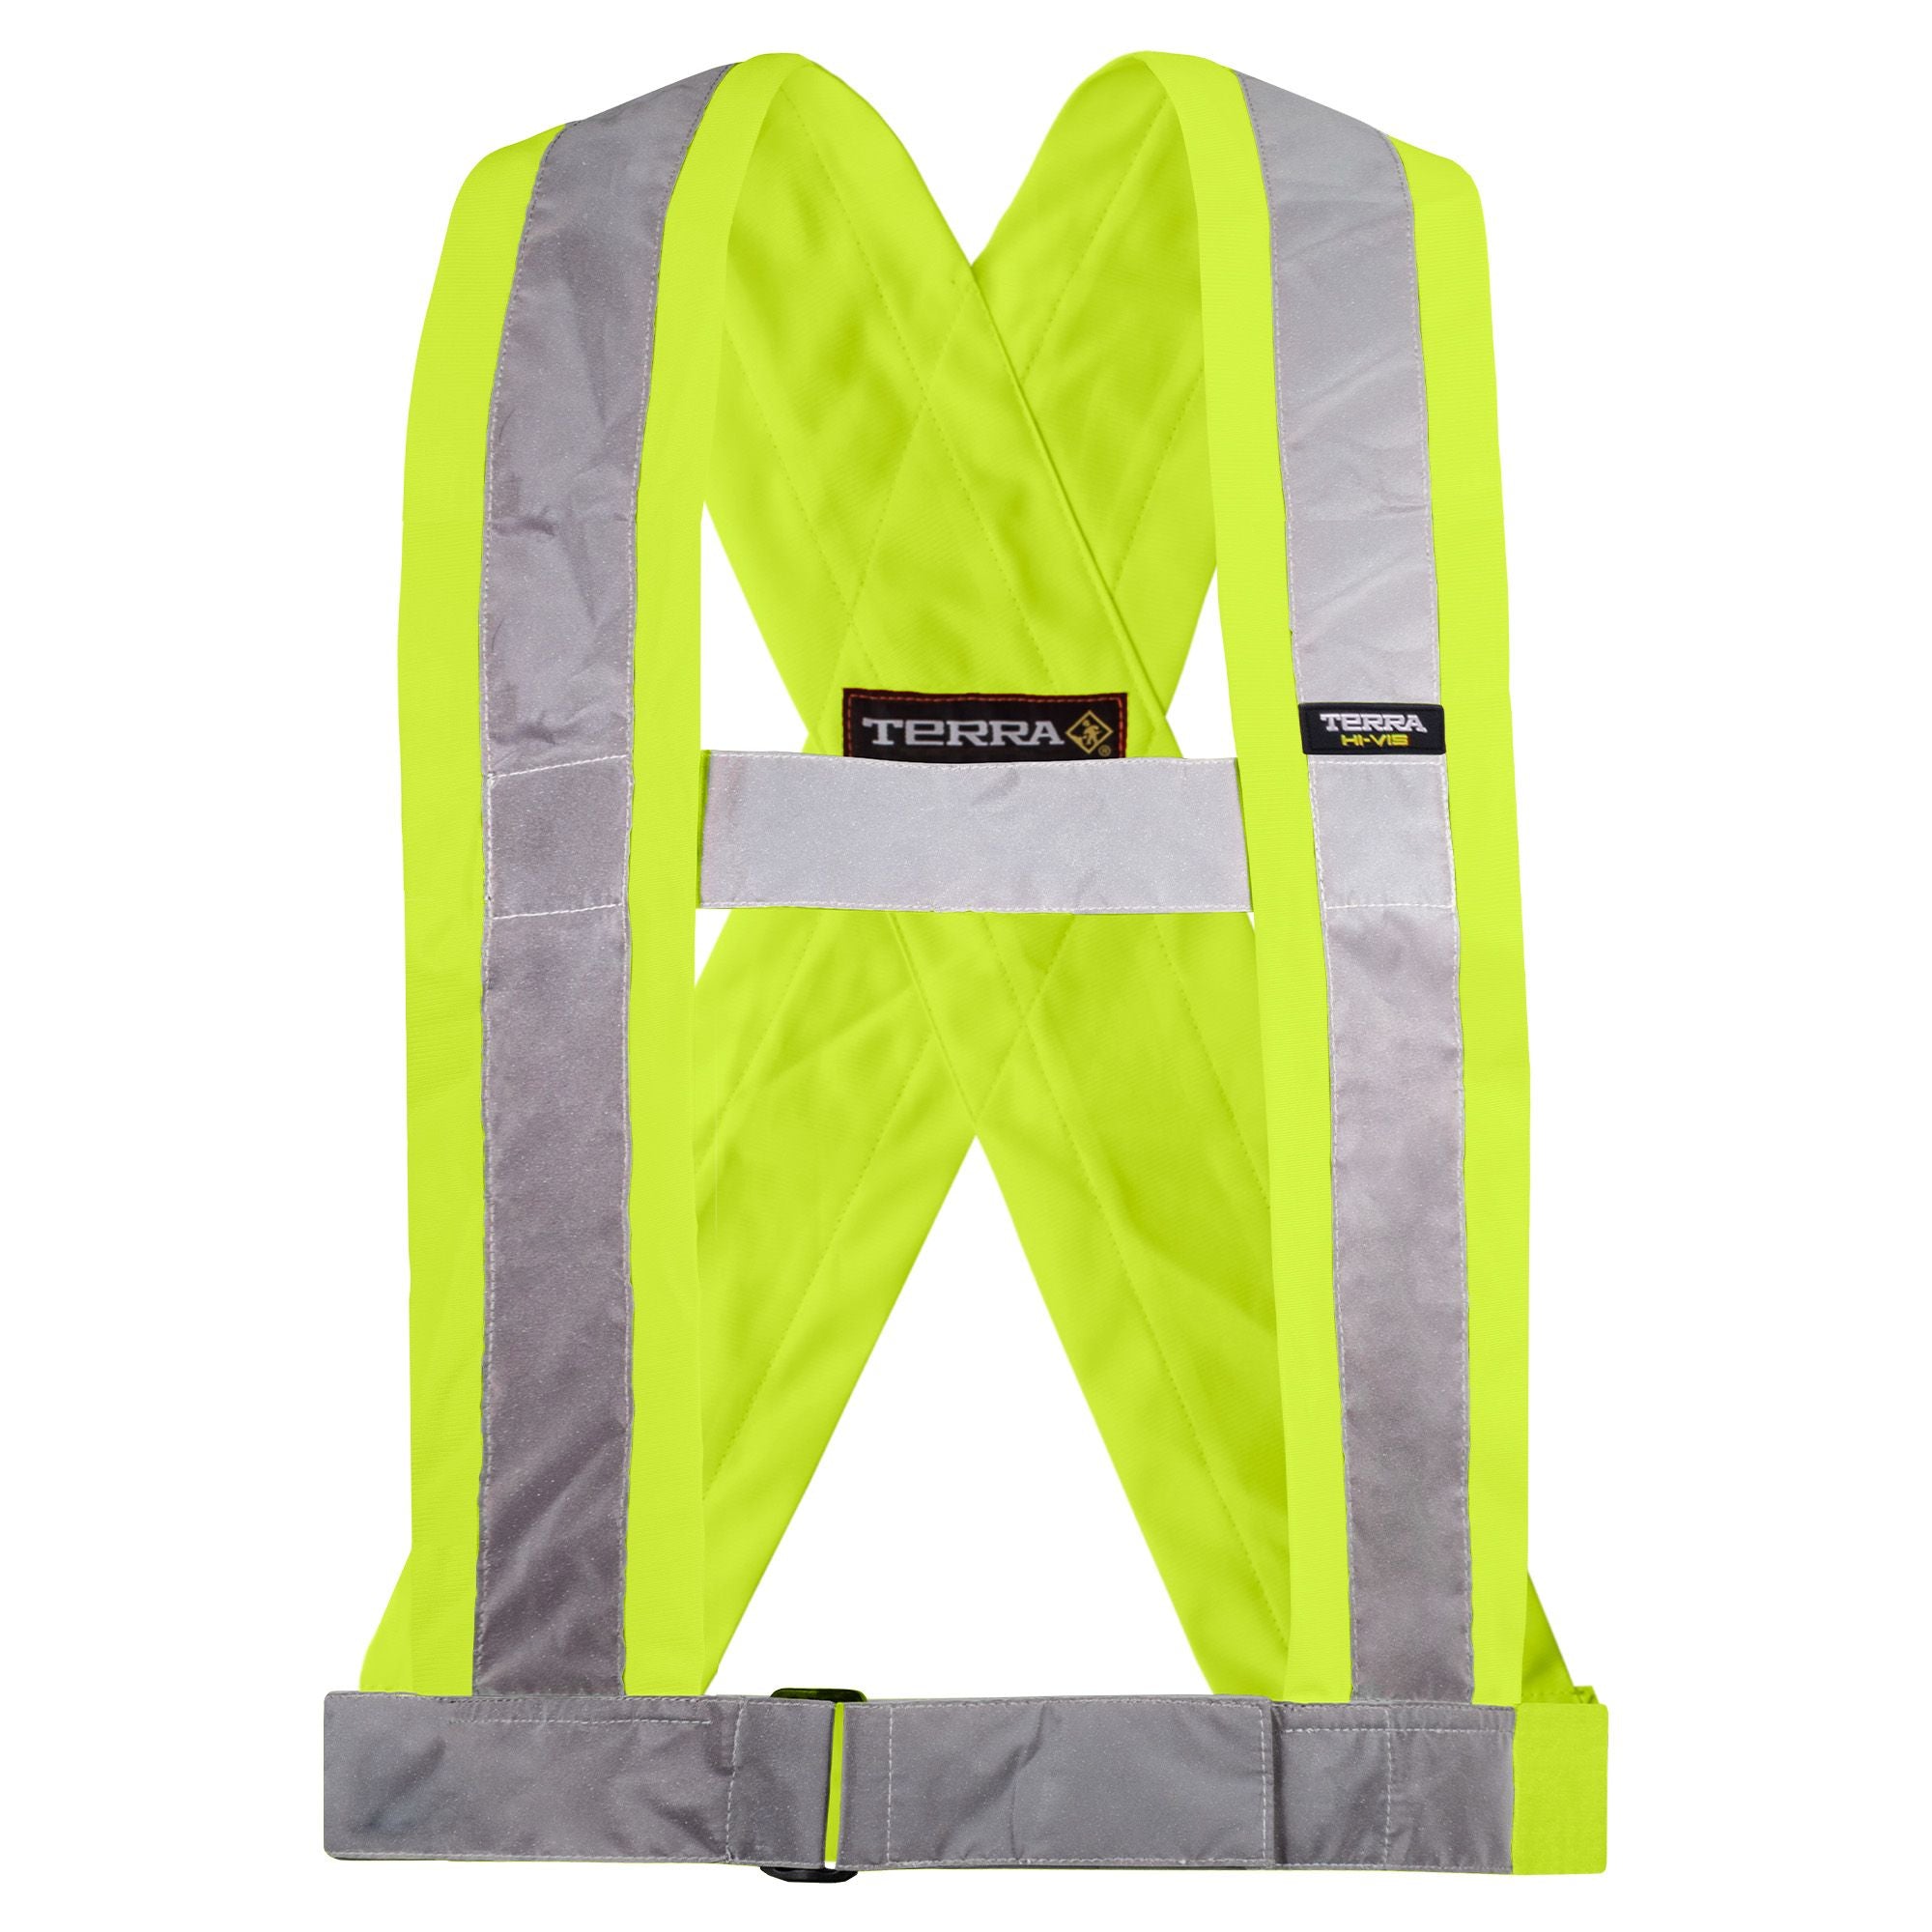 Terra Hi-Vis 4-Inch Safety Sash Traffic Harness with Adjustable Waist One Size Fits All